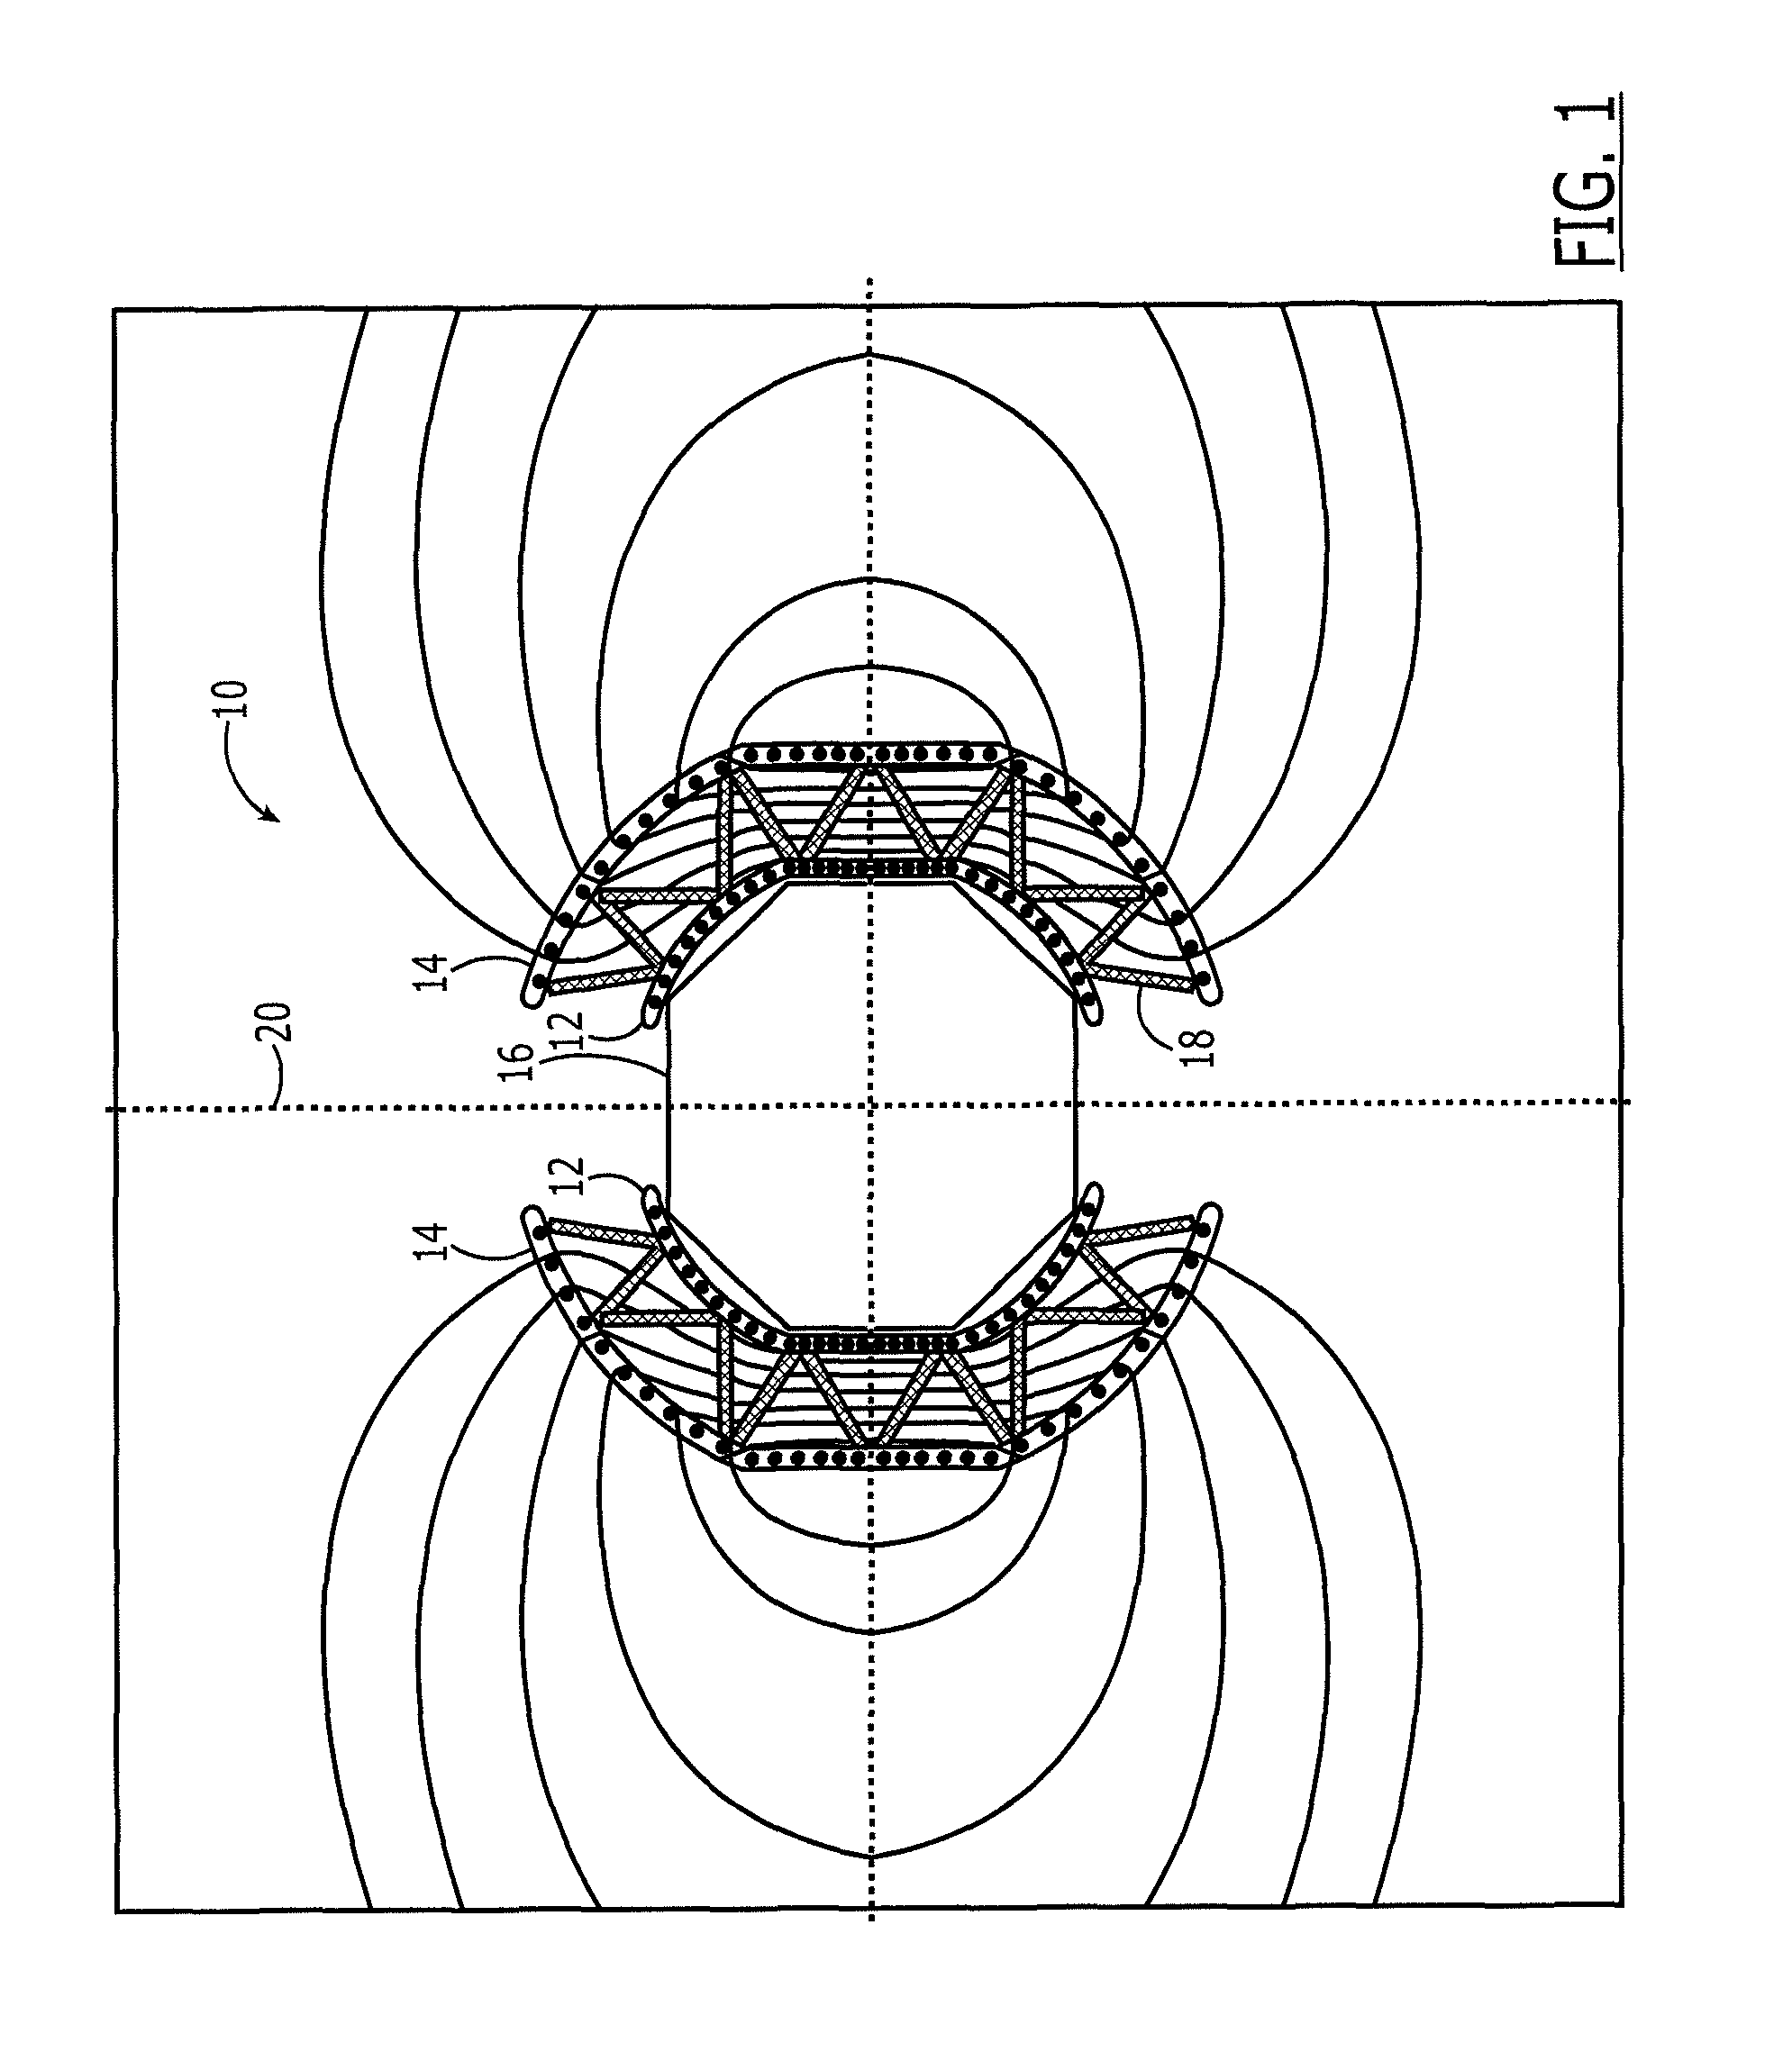 Cryogenically cooled radiation shield device and associated method